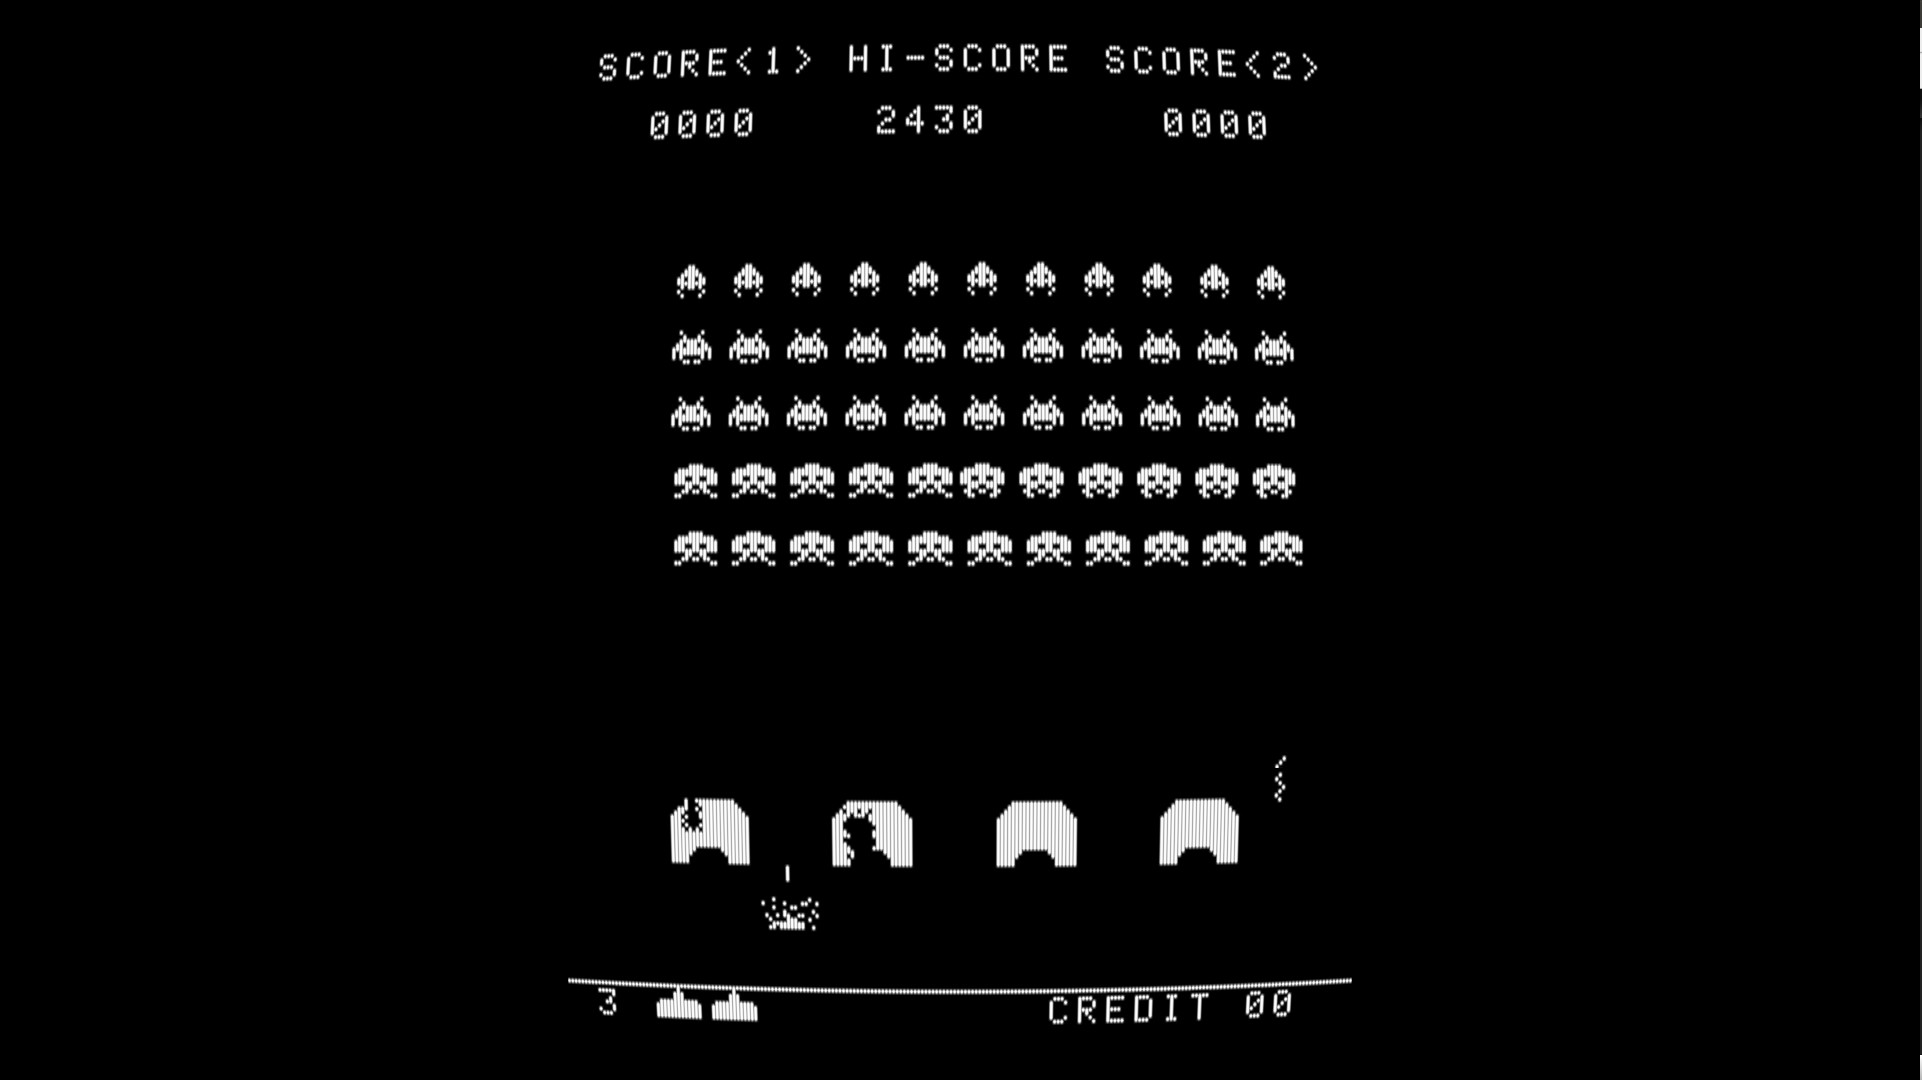 Space Invaders in pure black and white raster sprites only …